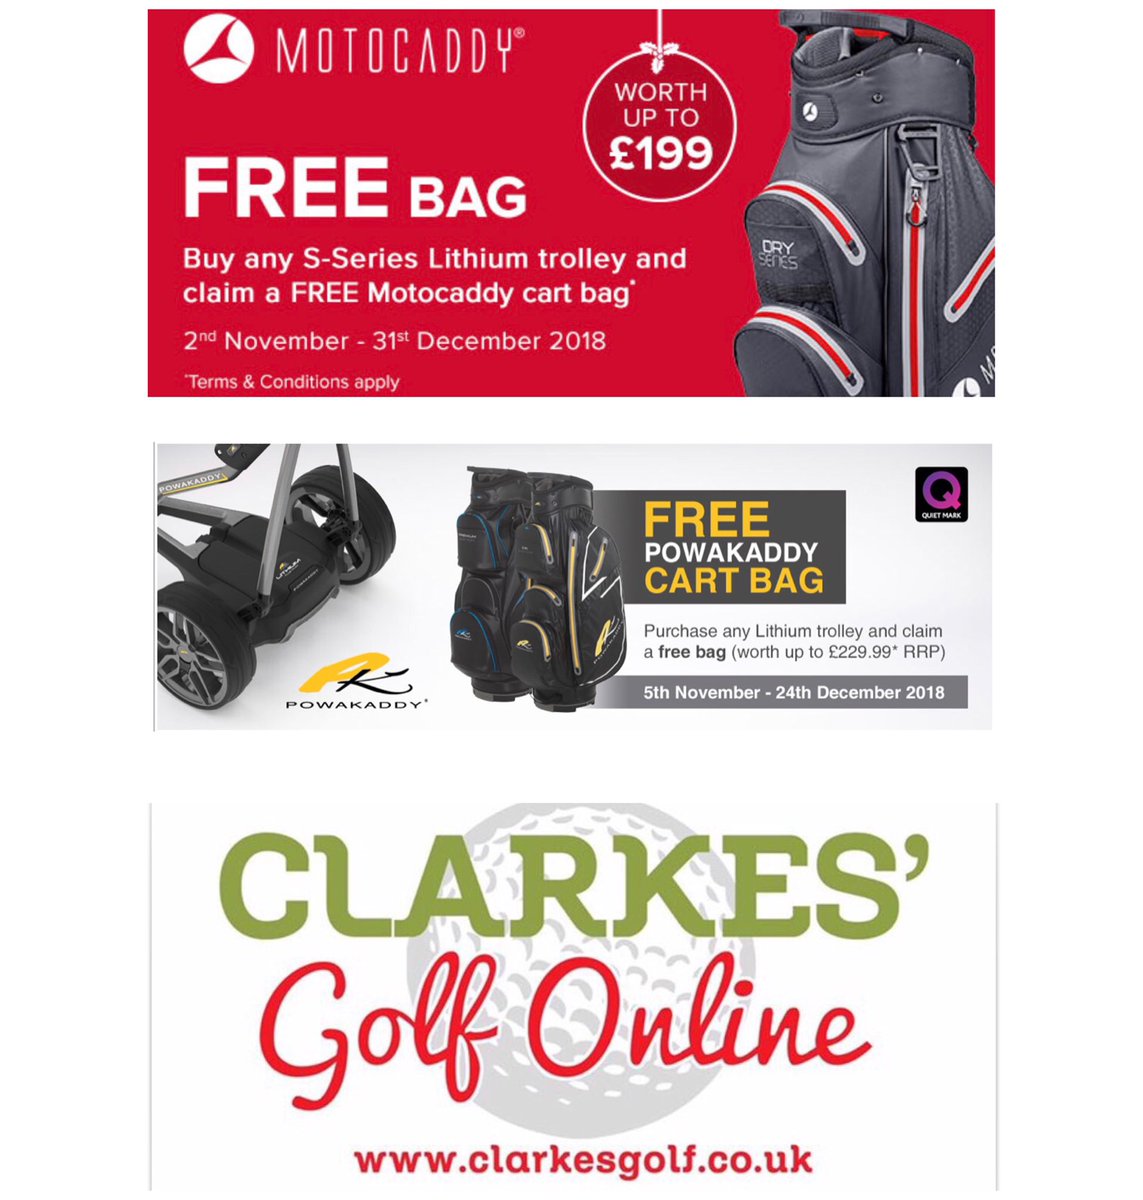 🎄🎅🏻*XMAS PROMOTIONS*🎅🏻🎄

🗣Fantastic •FREE• bag offer running up untill Xmas @ClarkesGolf from @MotocaddyGolf & @PowaKaddy_Golf 🎁
Shop Online or ☎️ 01744 885294 for more info T’s & C’s apply. 
#motocaddy #powakaddy #freebag #xmasgifts #electrictrolley #lithium